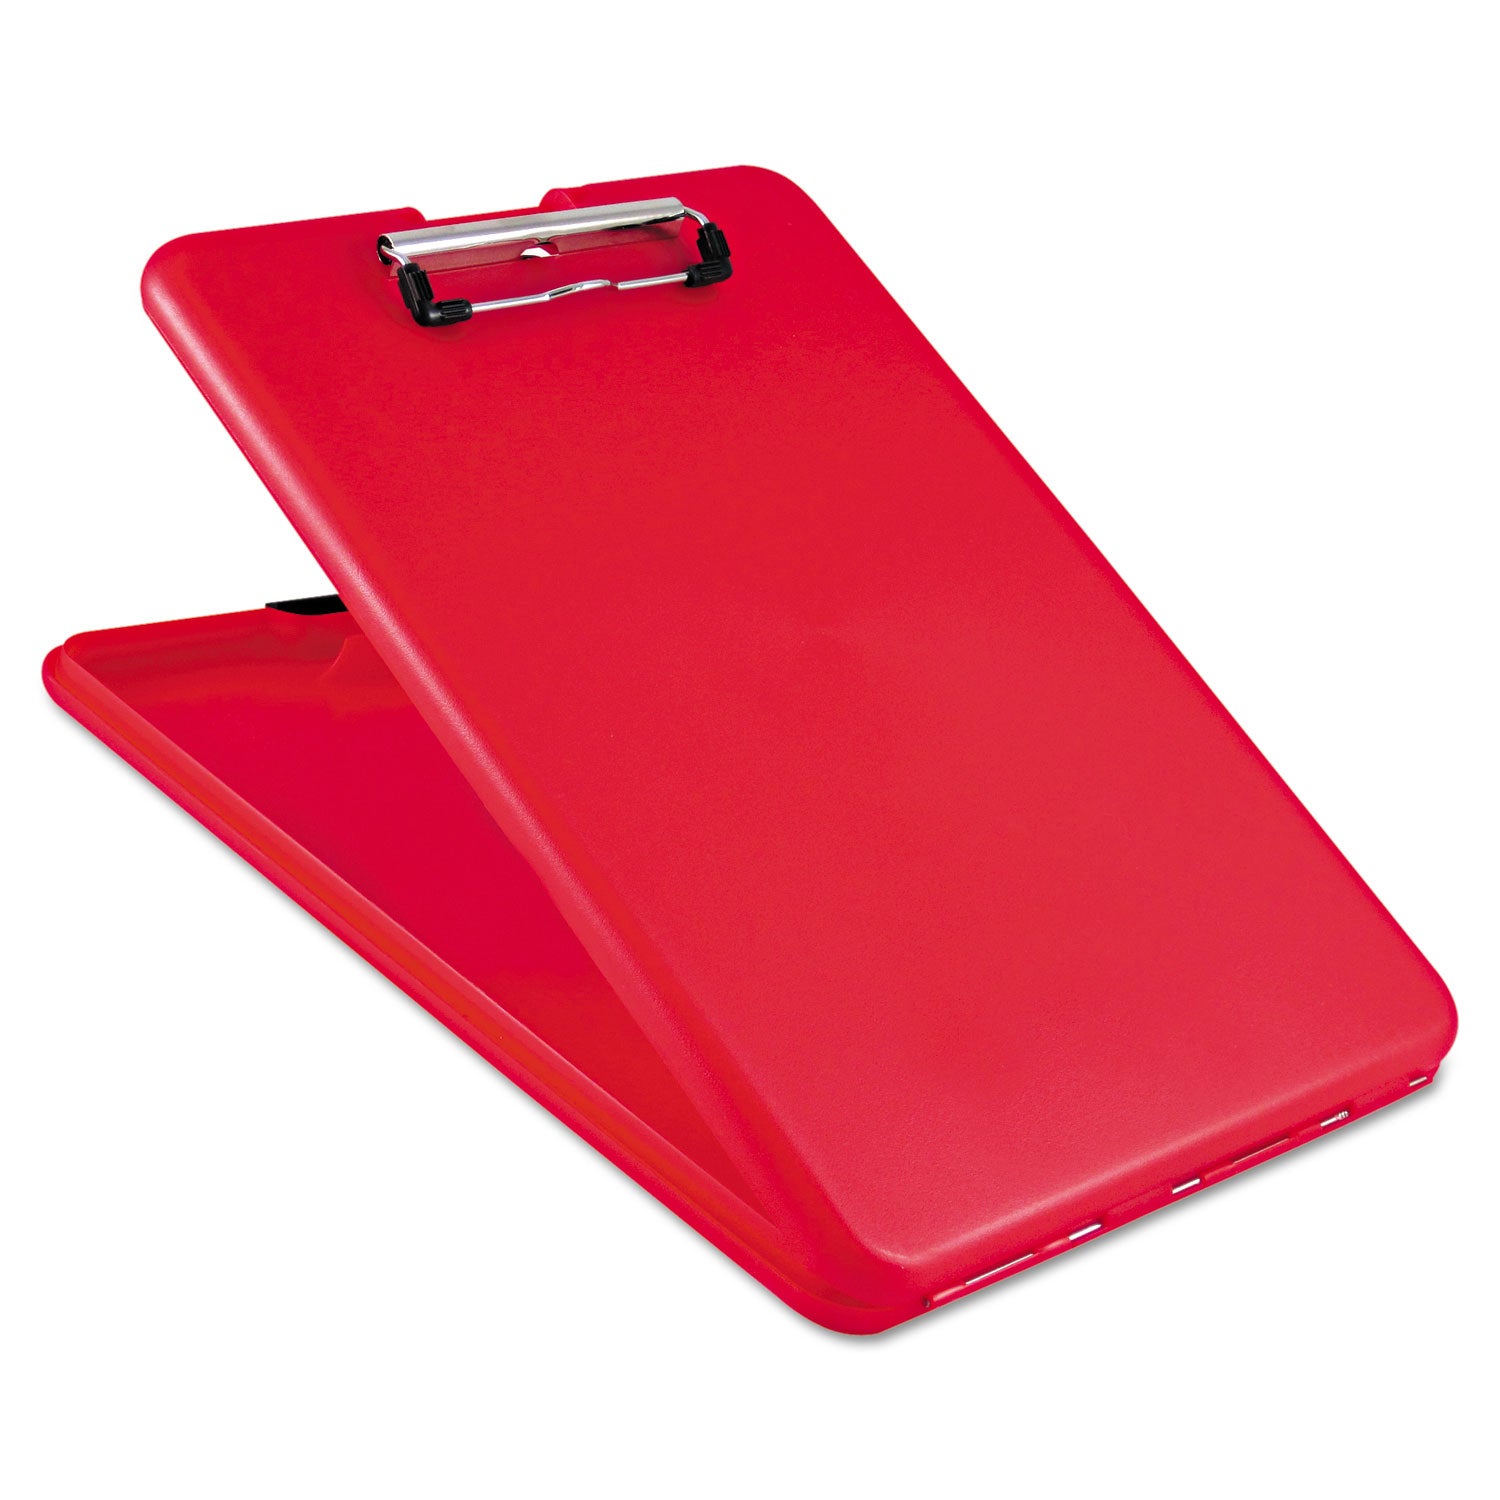 SlimMate Storage Clipboard, 0.5" Clip Capacity, Holds 8.5 x 11 Sheets, Red - 